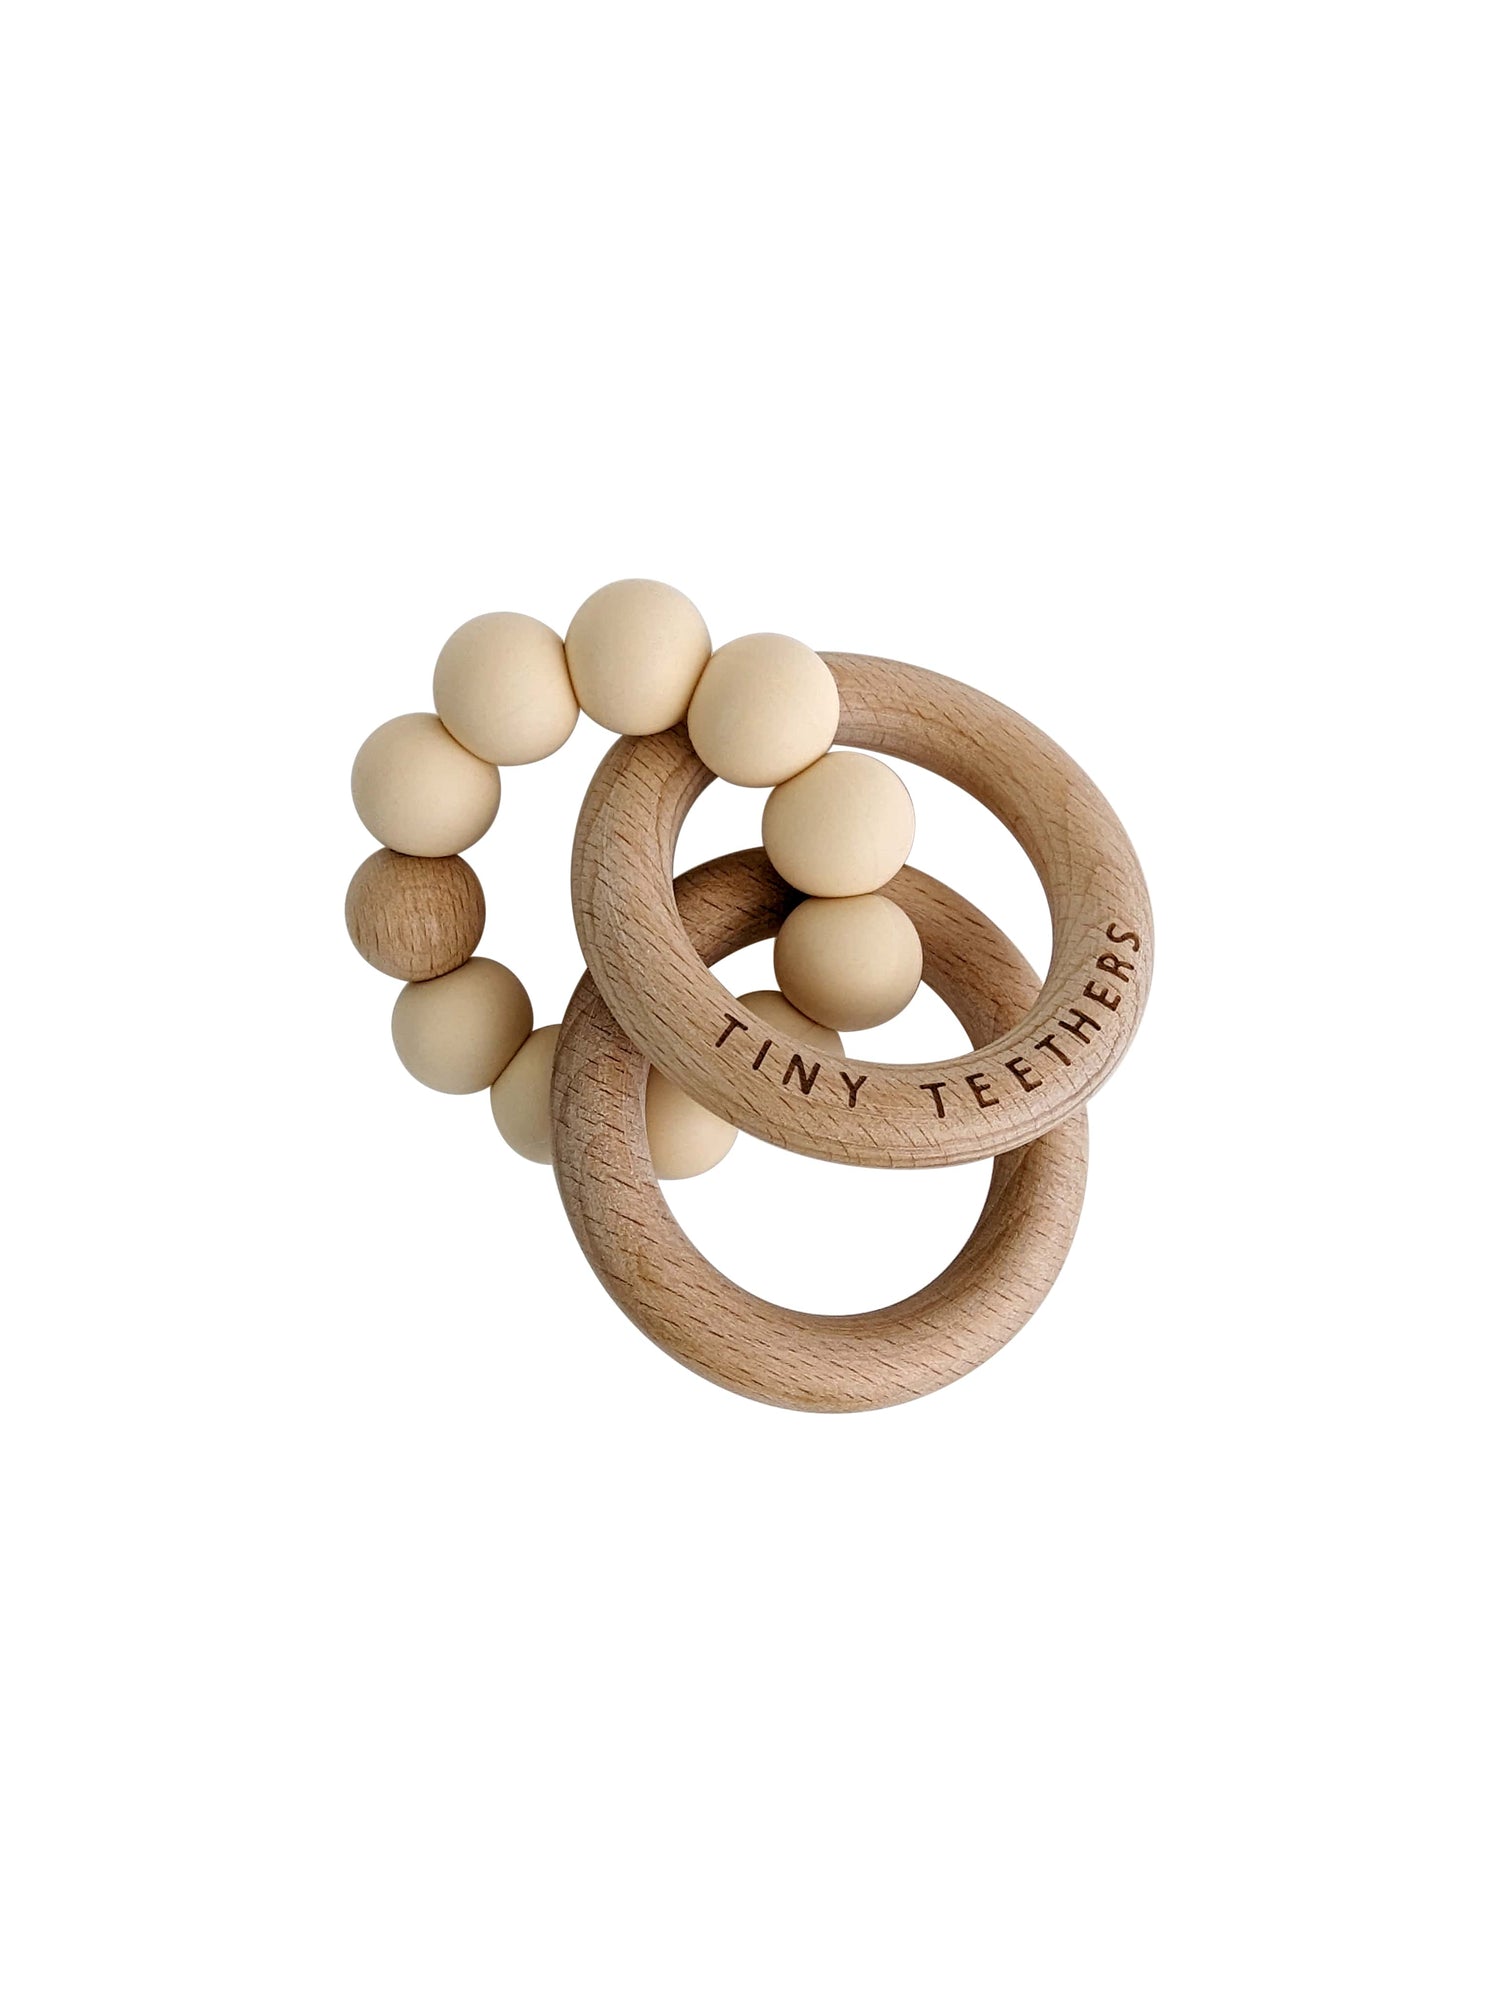 Ivory Rattle Teether Rings